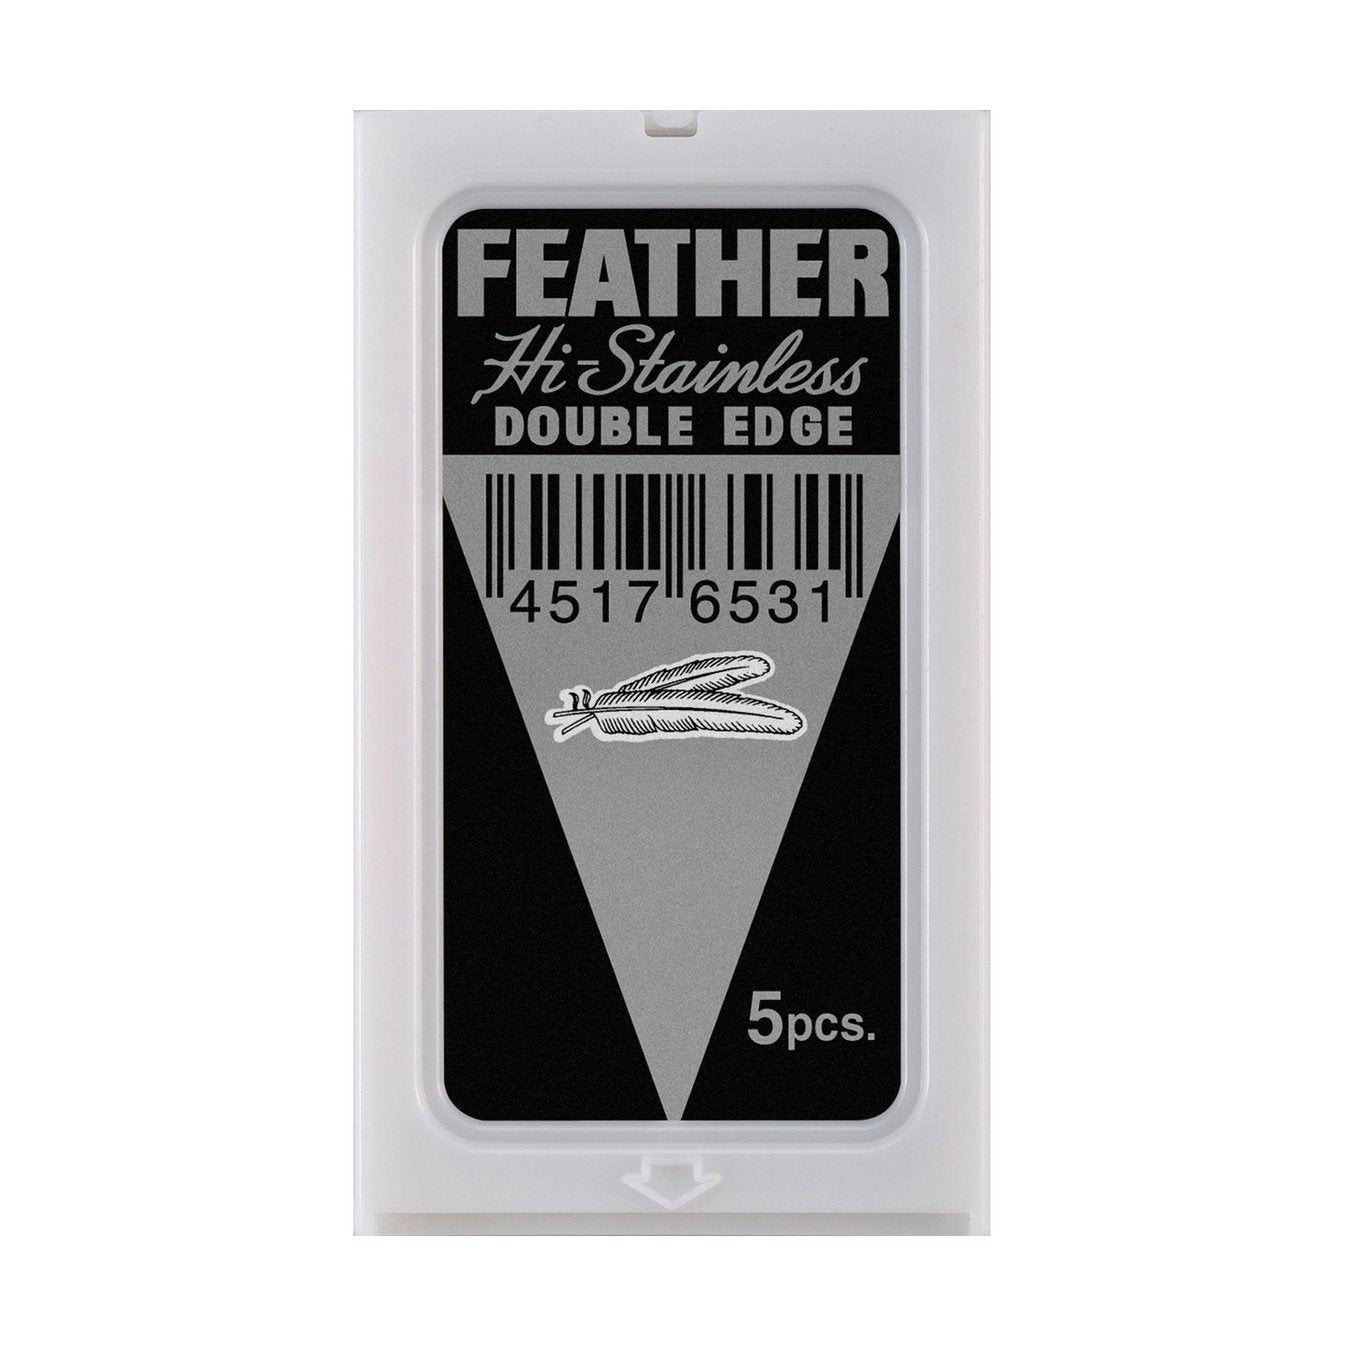 Feather Hi Stainless Platinum Coated Double Edge Blades